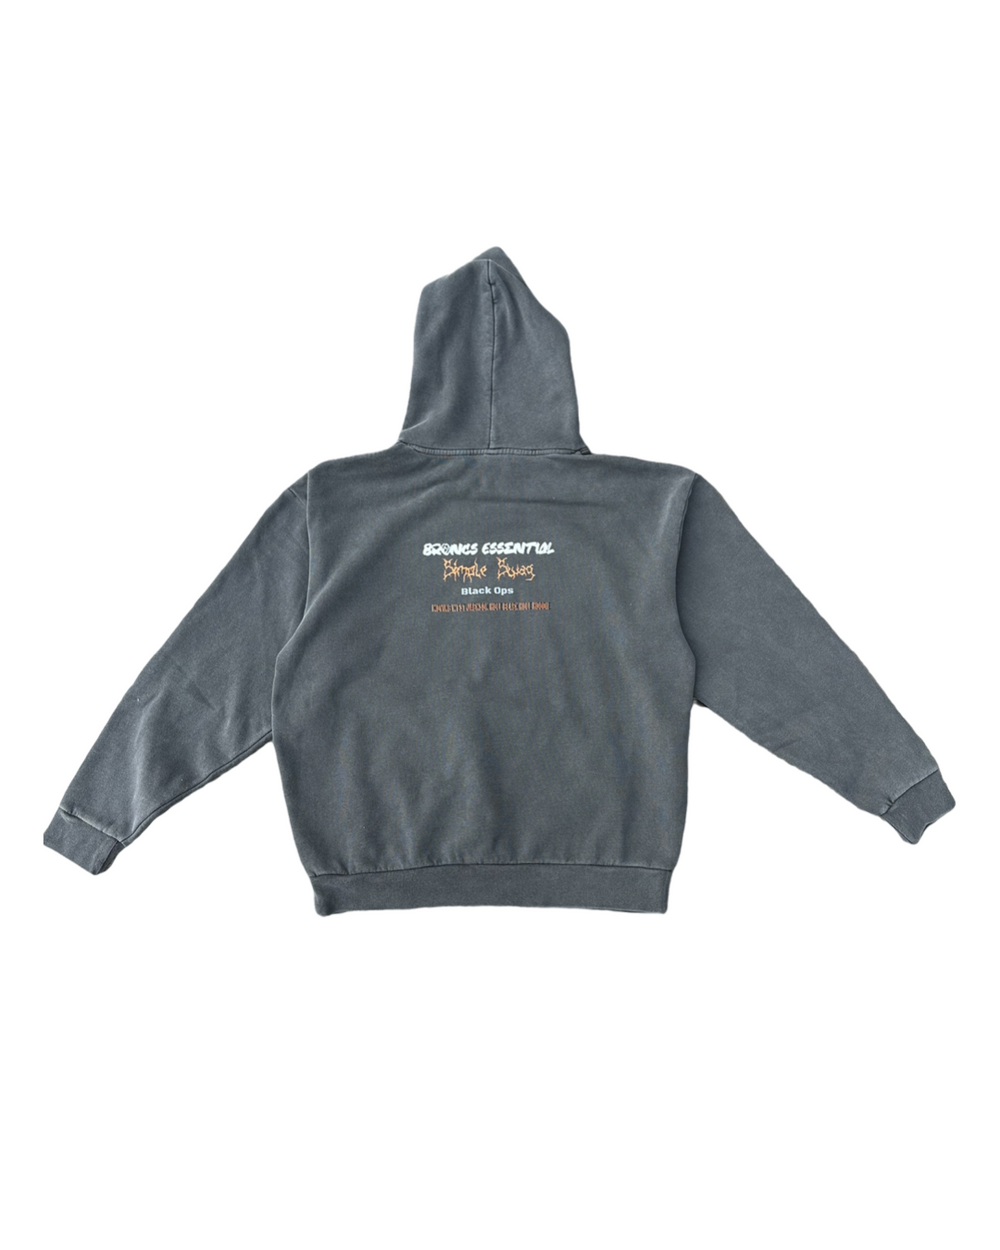 Black Hole Connections Hoodie